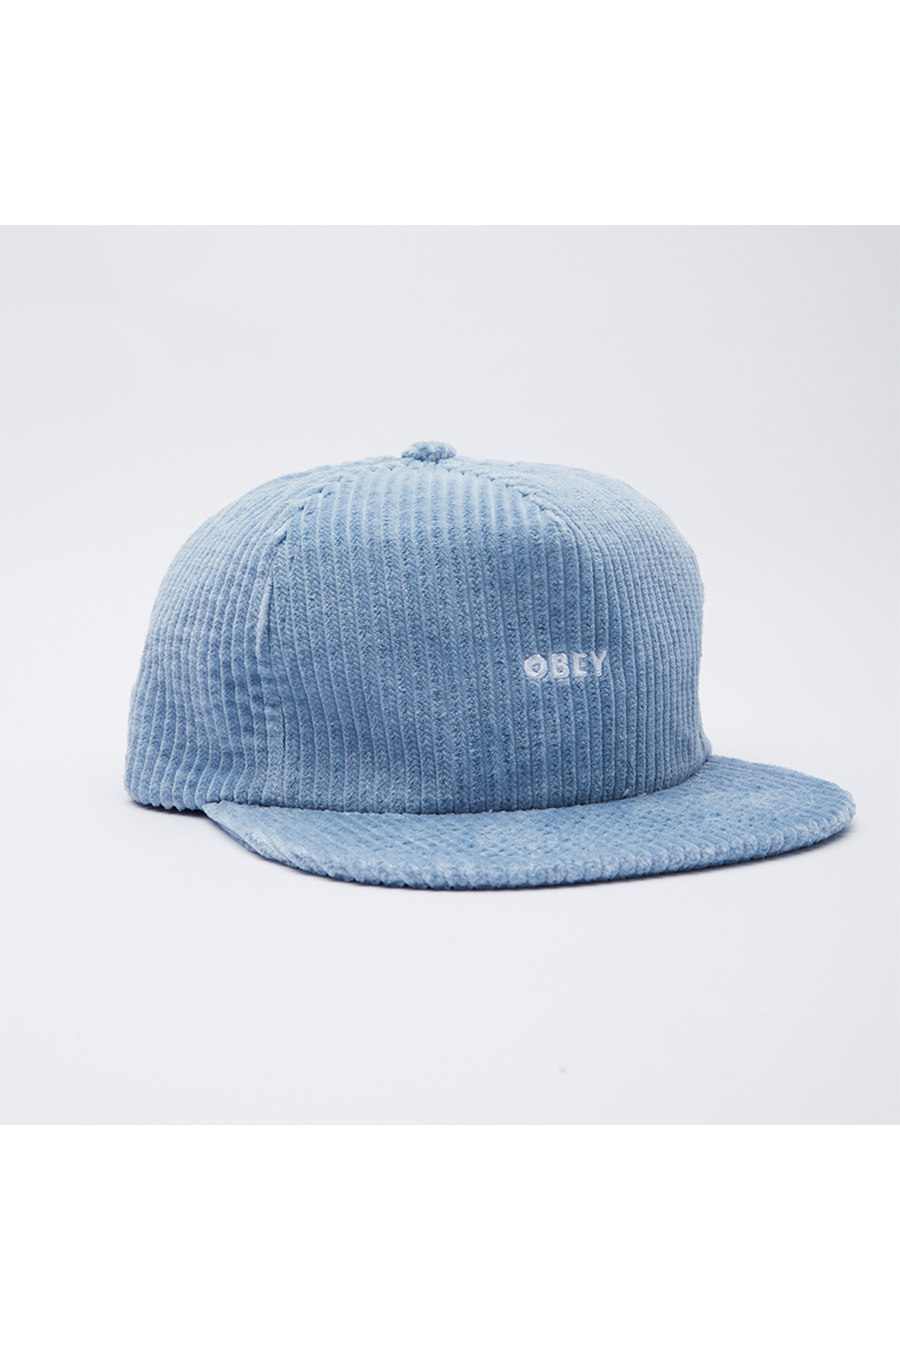 Bold Cord Strapback | Ice Blue - Main Image Number 1 of 2